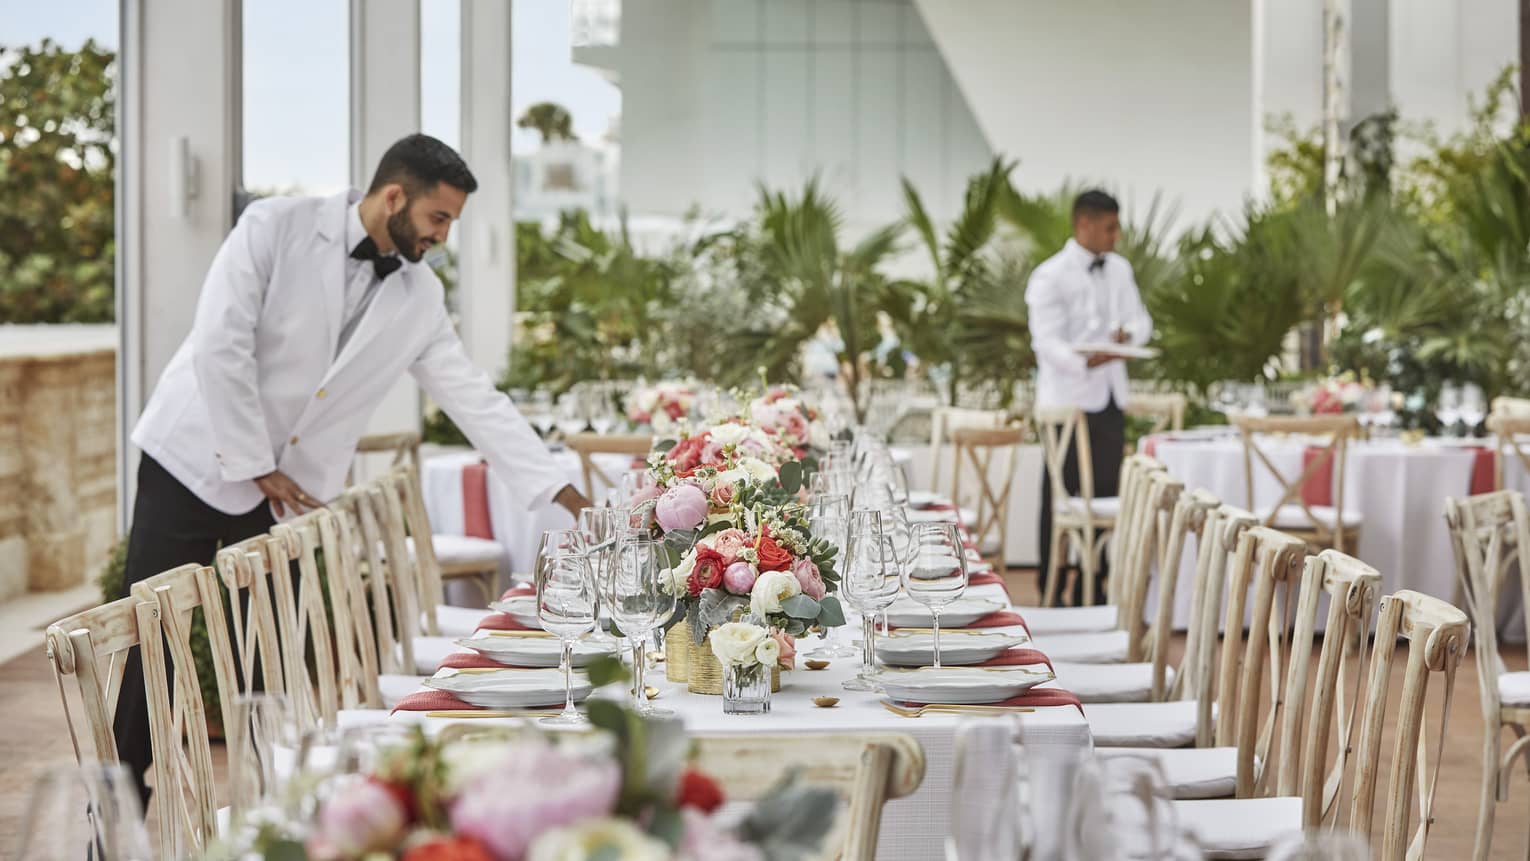 Hotel staff wearing white suit jackets set long wedding dining table with flowers